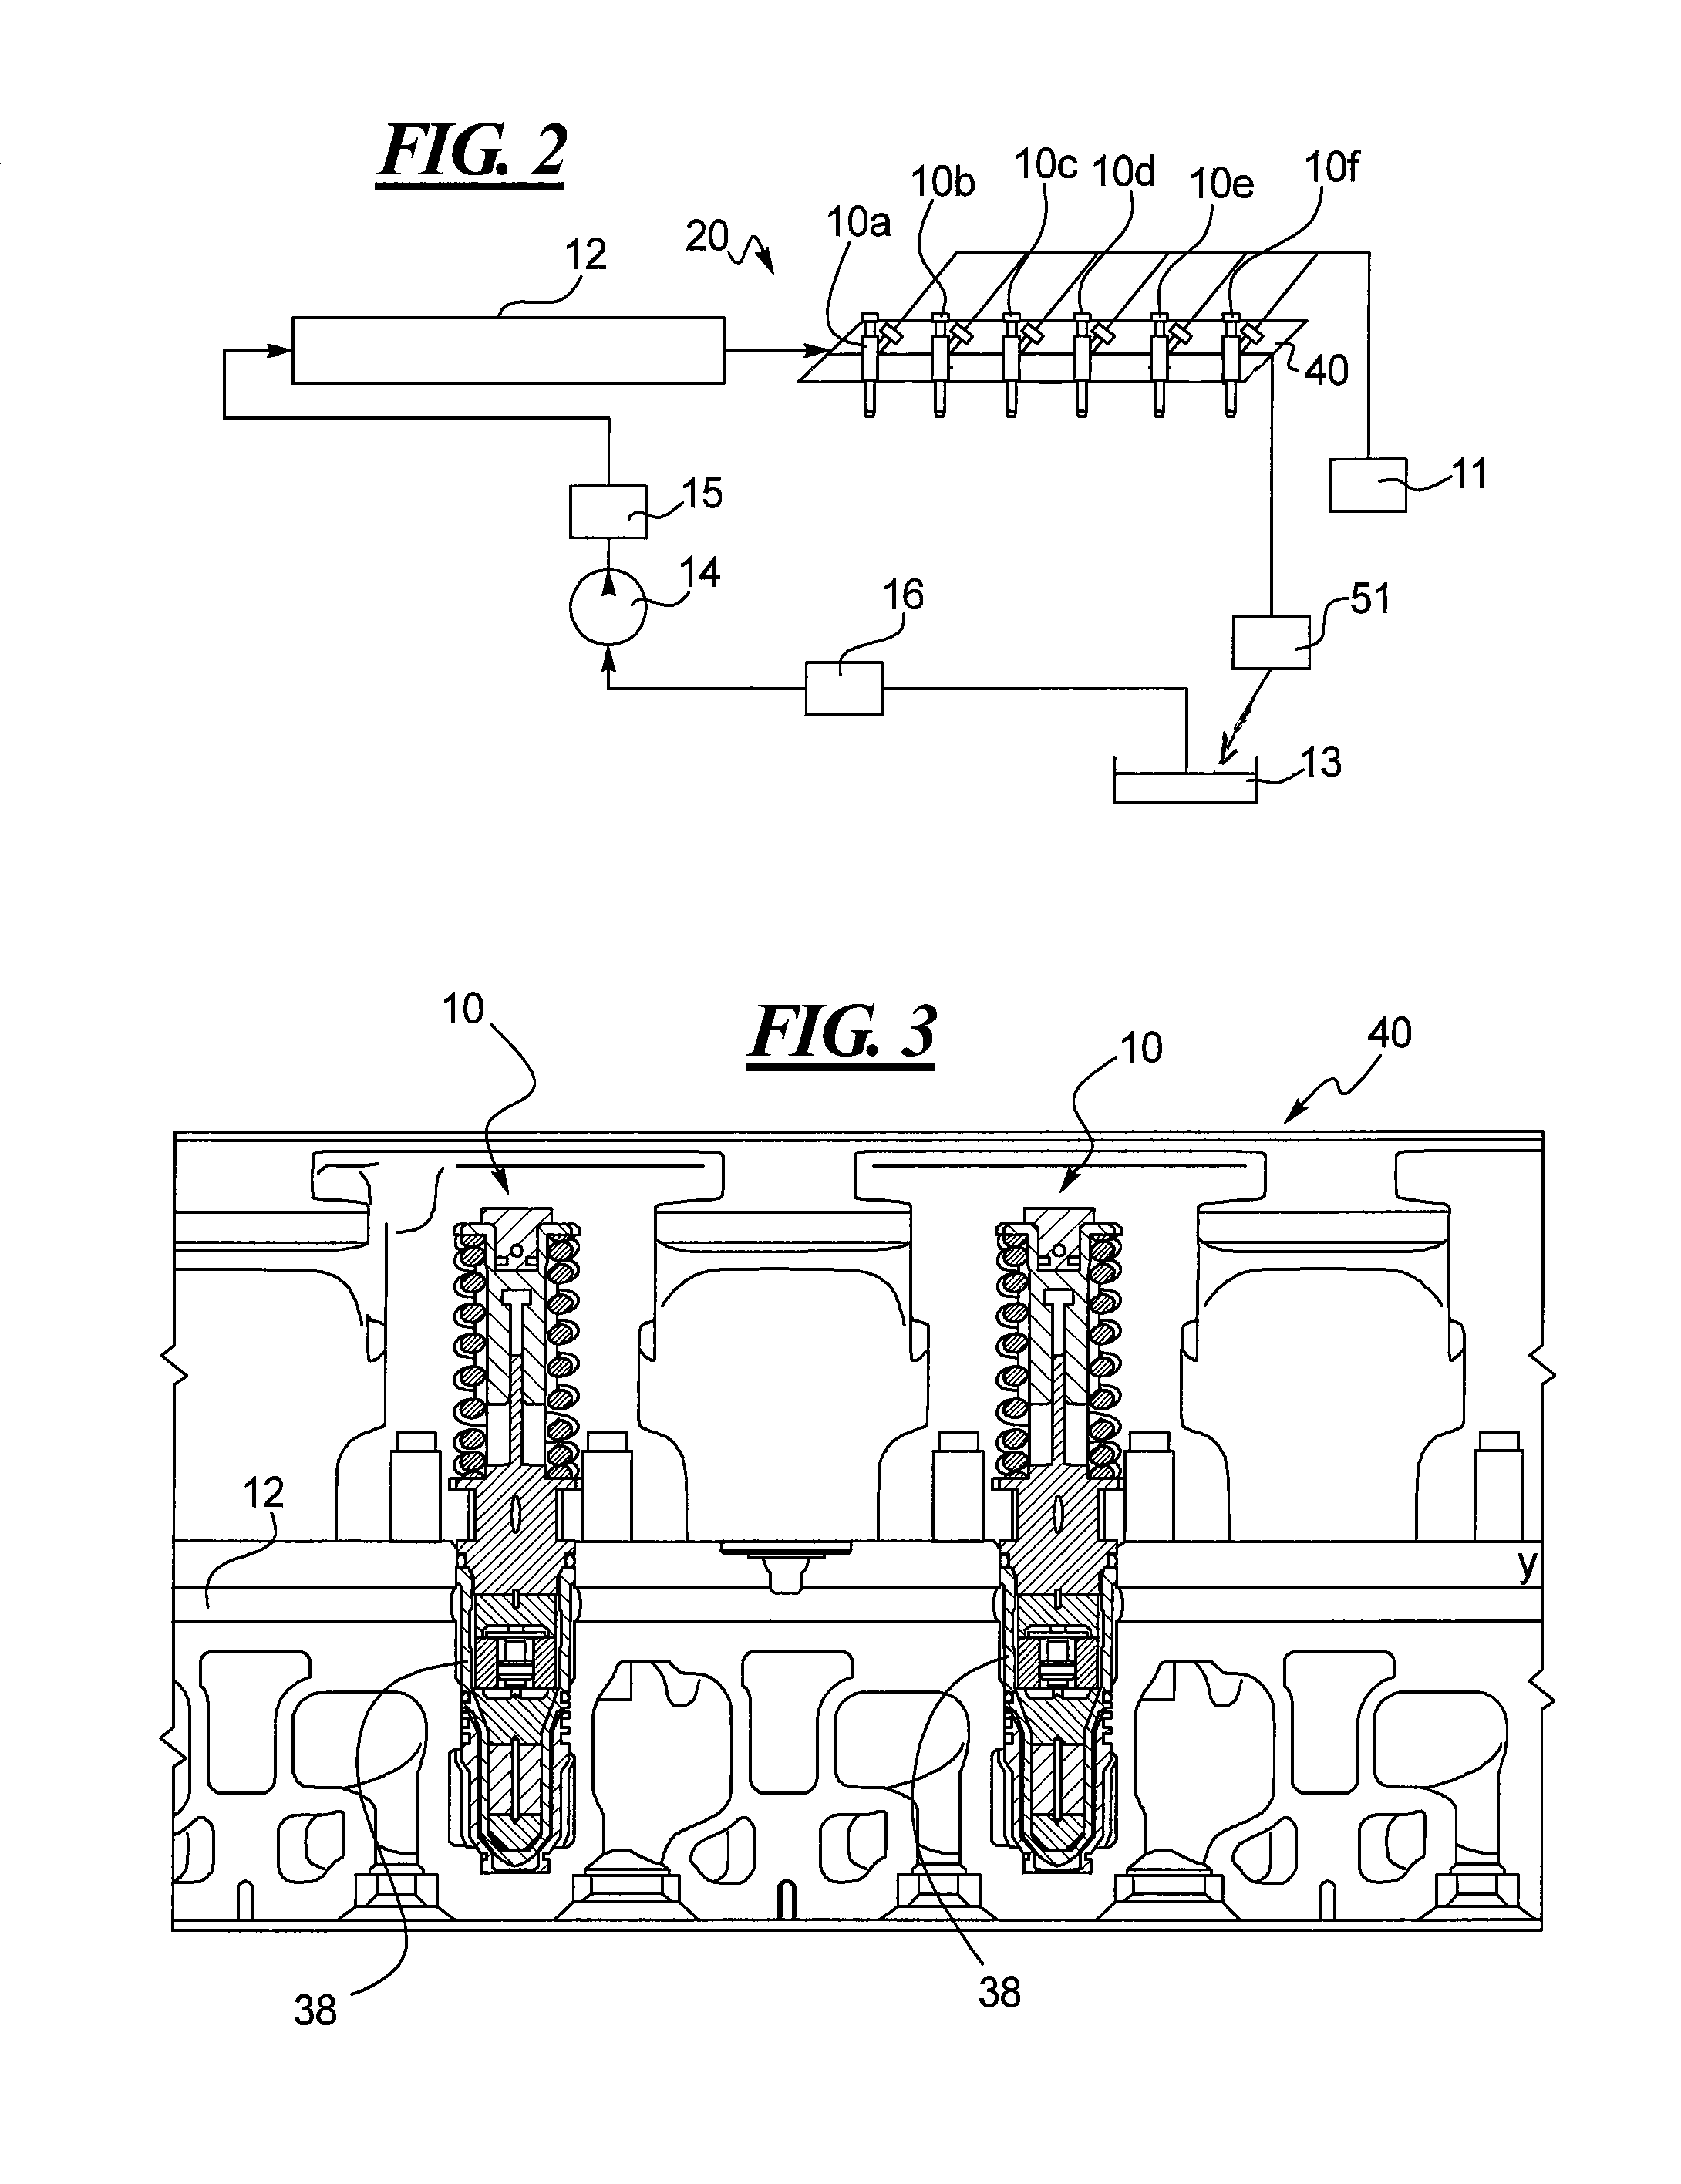 System and method for cooling fuel injectors